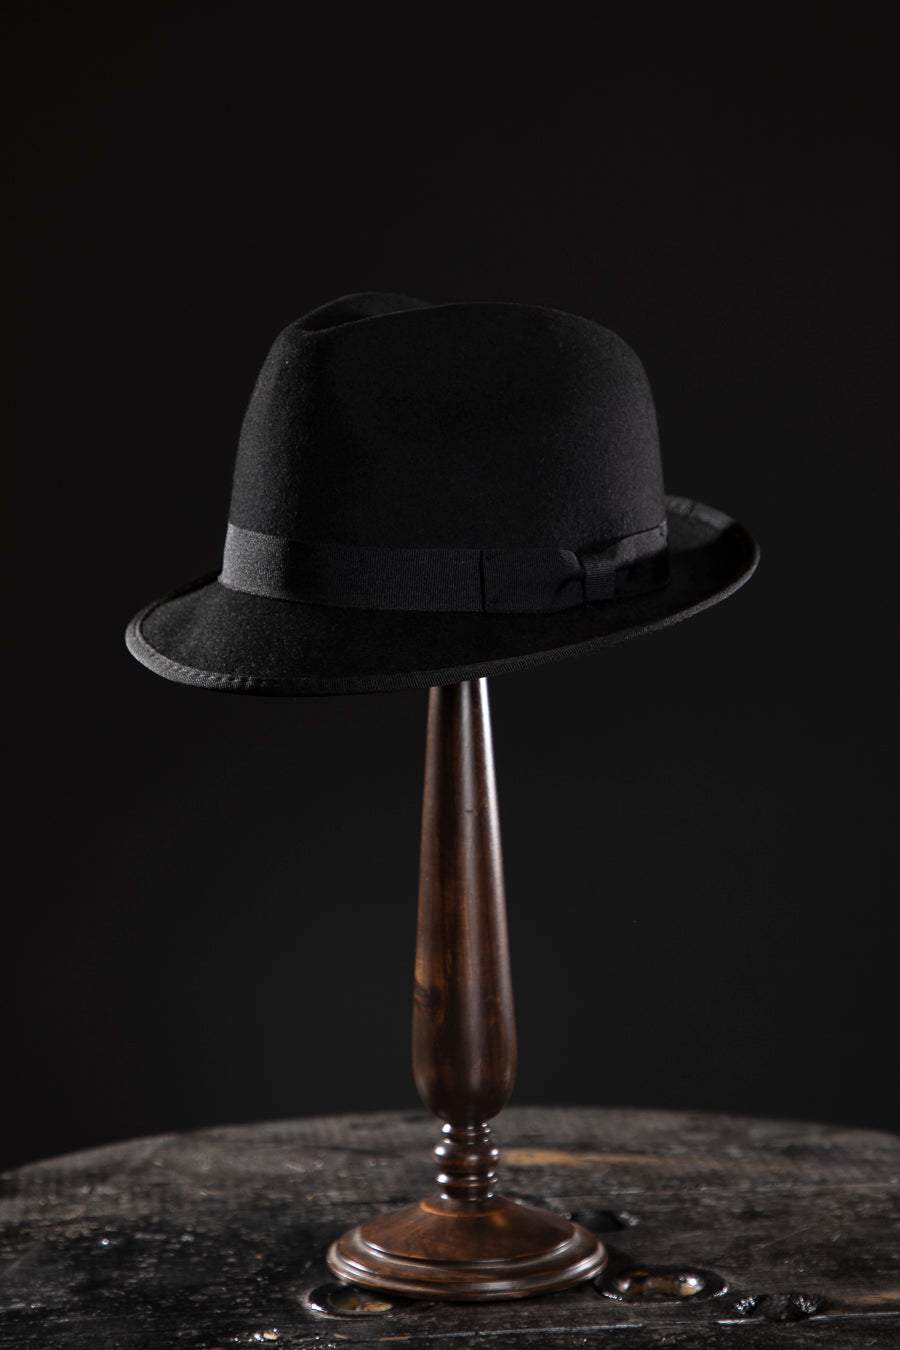 Deluxe, high quality hats for men and women. Our collection of hats including wool felt top hats, fedoras, bowlers, caps, fedoras, trilbys, cloches and more are a wonderful addition to a 1920s Gangster or Gatsby costume, or the perfect fashion accessory. Shop online, or visit our Mornington hat store to see all that we have to offer.